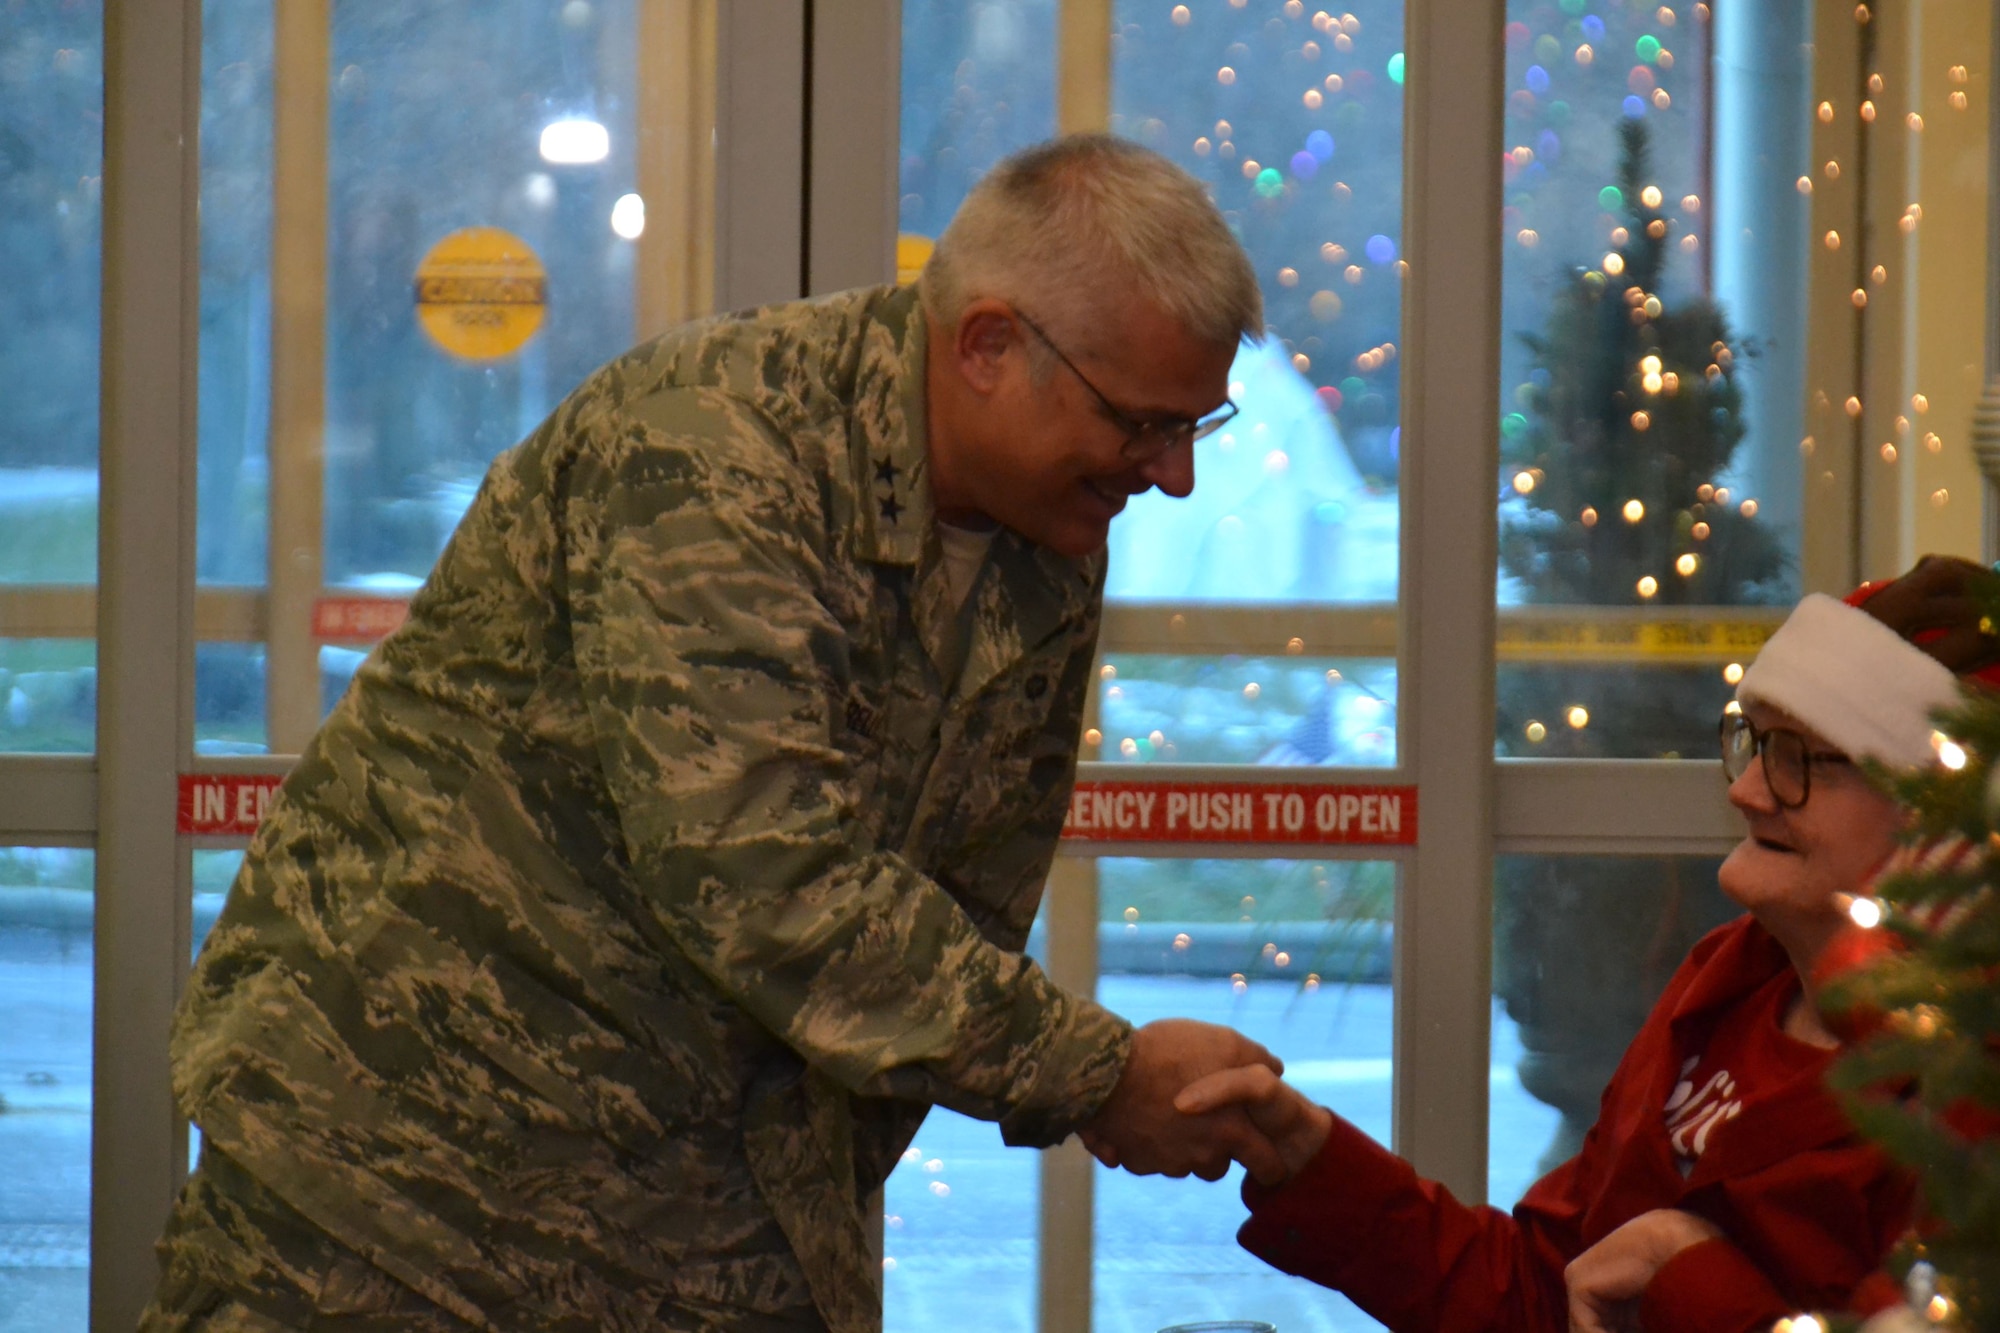 Maj. Gen. Tony Carrelli, Pennsylvania's adjutant general and head of the Pennsylvania Department of Military and Veterans Affairs (DMVA), greets a resident of the Delaware Valley Veteran’s Home, Philadelphia, during a holiday-themed visit by Pa. National Guardsmen Dec. 14. 2017. Airmen and Soldiers of the Commonwealth not only play a critical role operationally, but also as ambassadors for the U.S. military. (U.S. Air National Guard photo by Tech. Sgt. Andria Allmond)